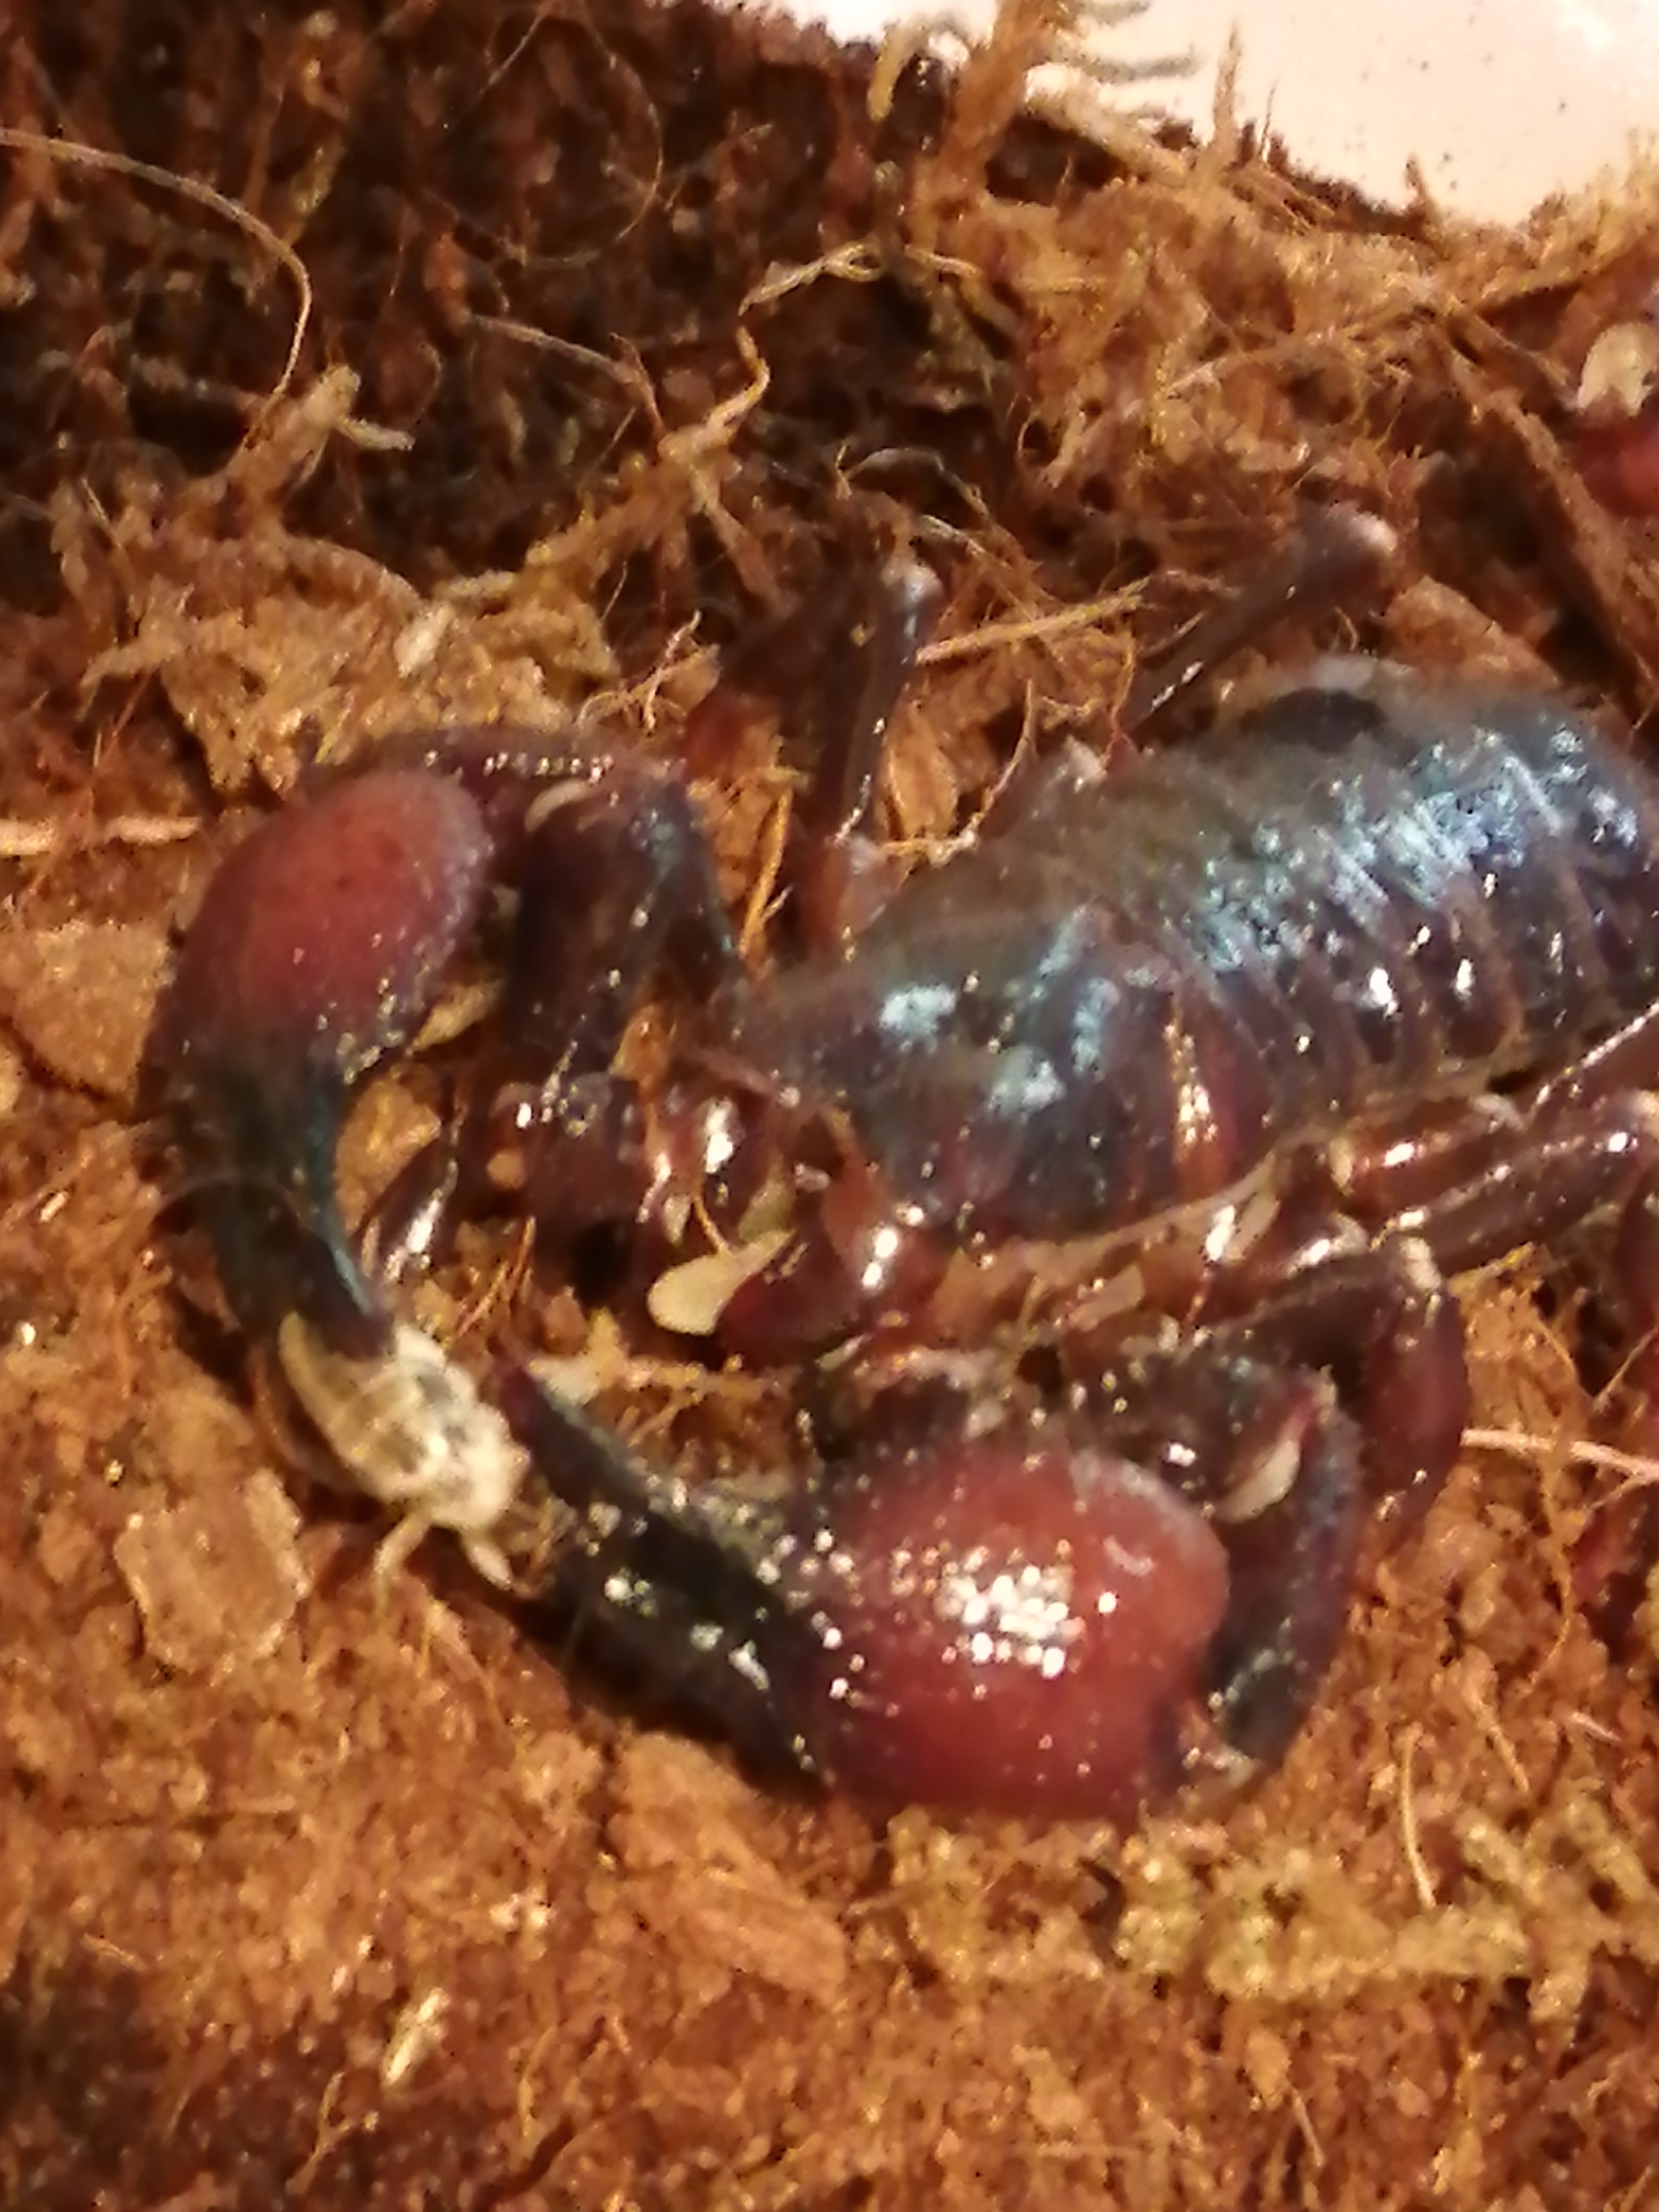 Red clawed scorpion